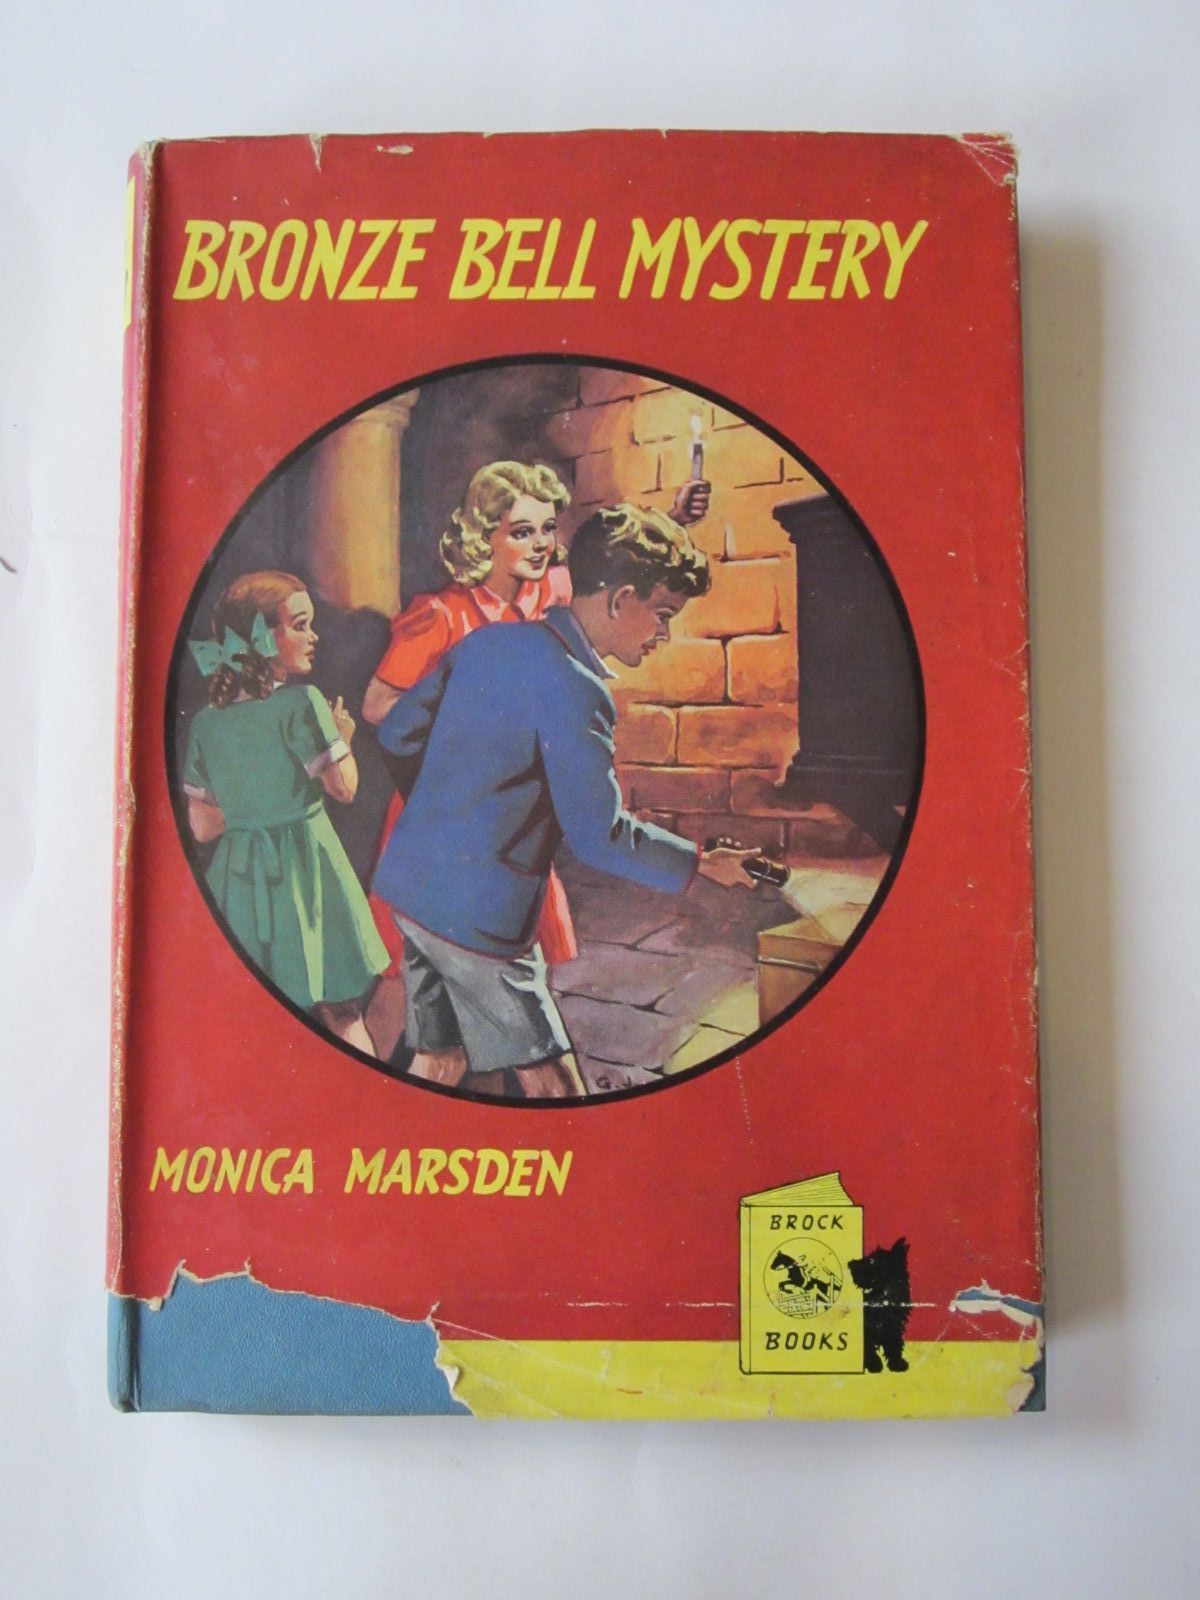 Cover of BRONZE BELL MYSTERY by Monica Marsden